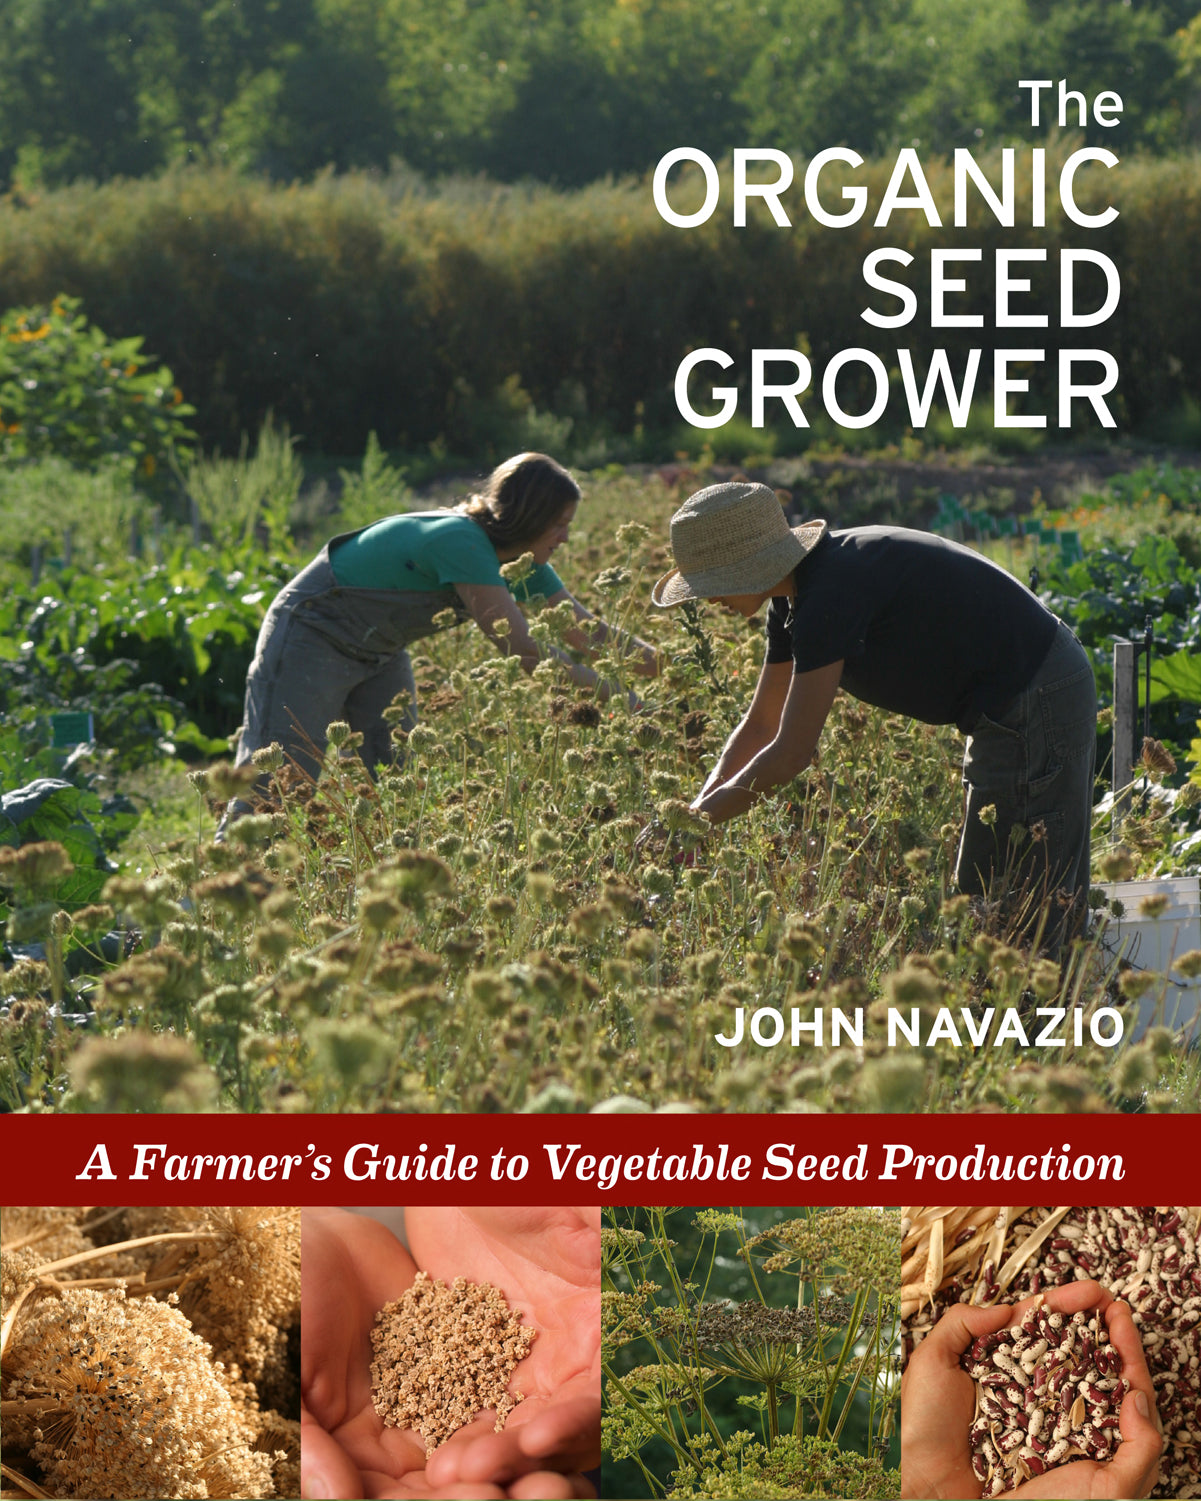 The Organic Seed Grower: A Farmer’s Guide to Vegetable Seed Production by John Navazio